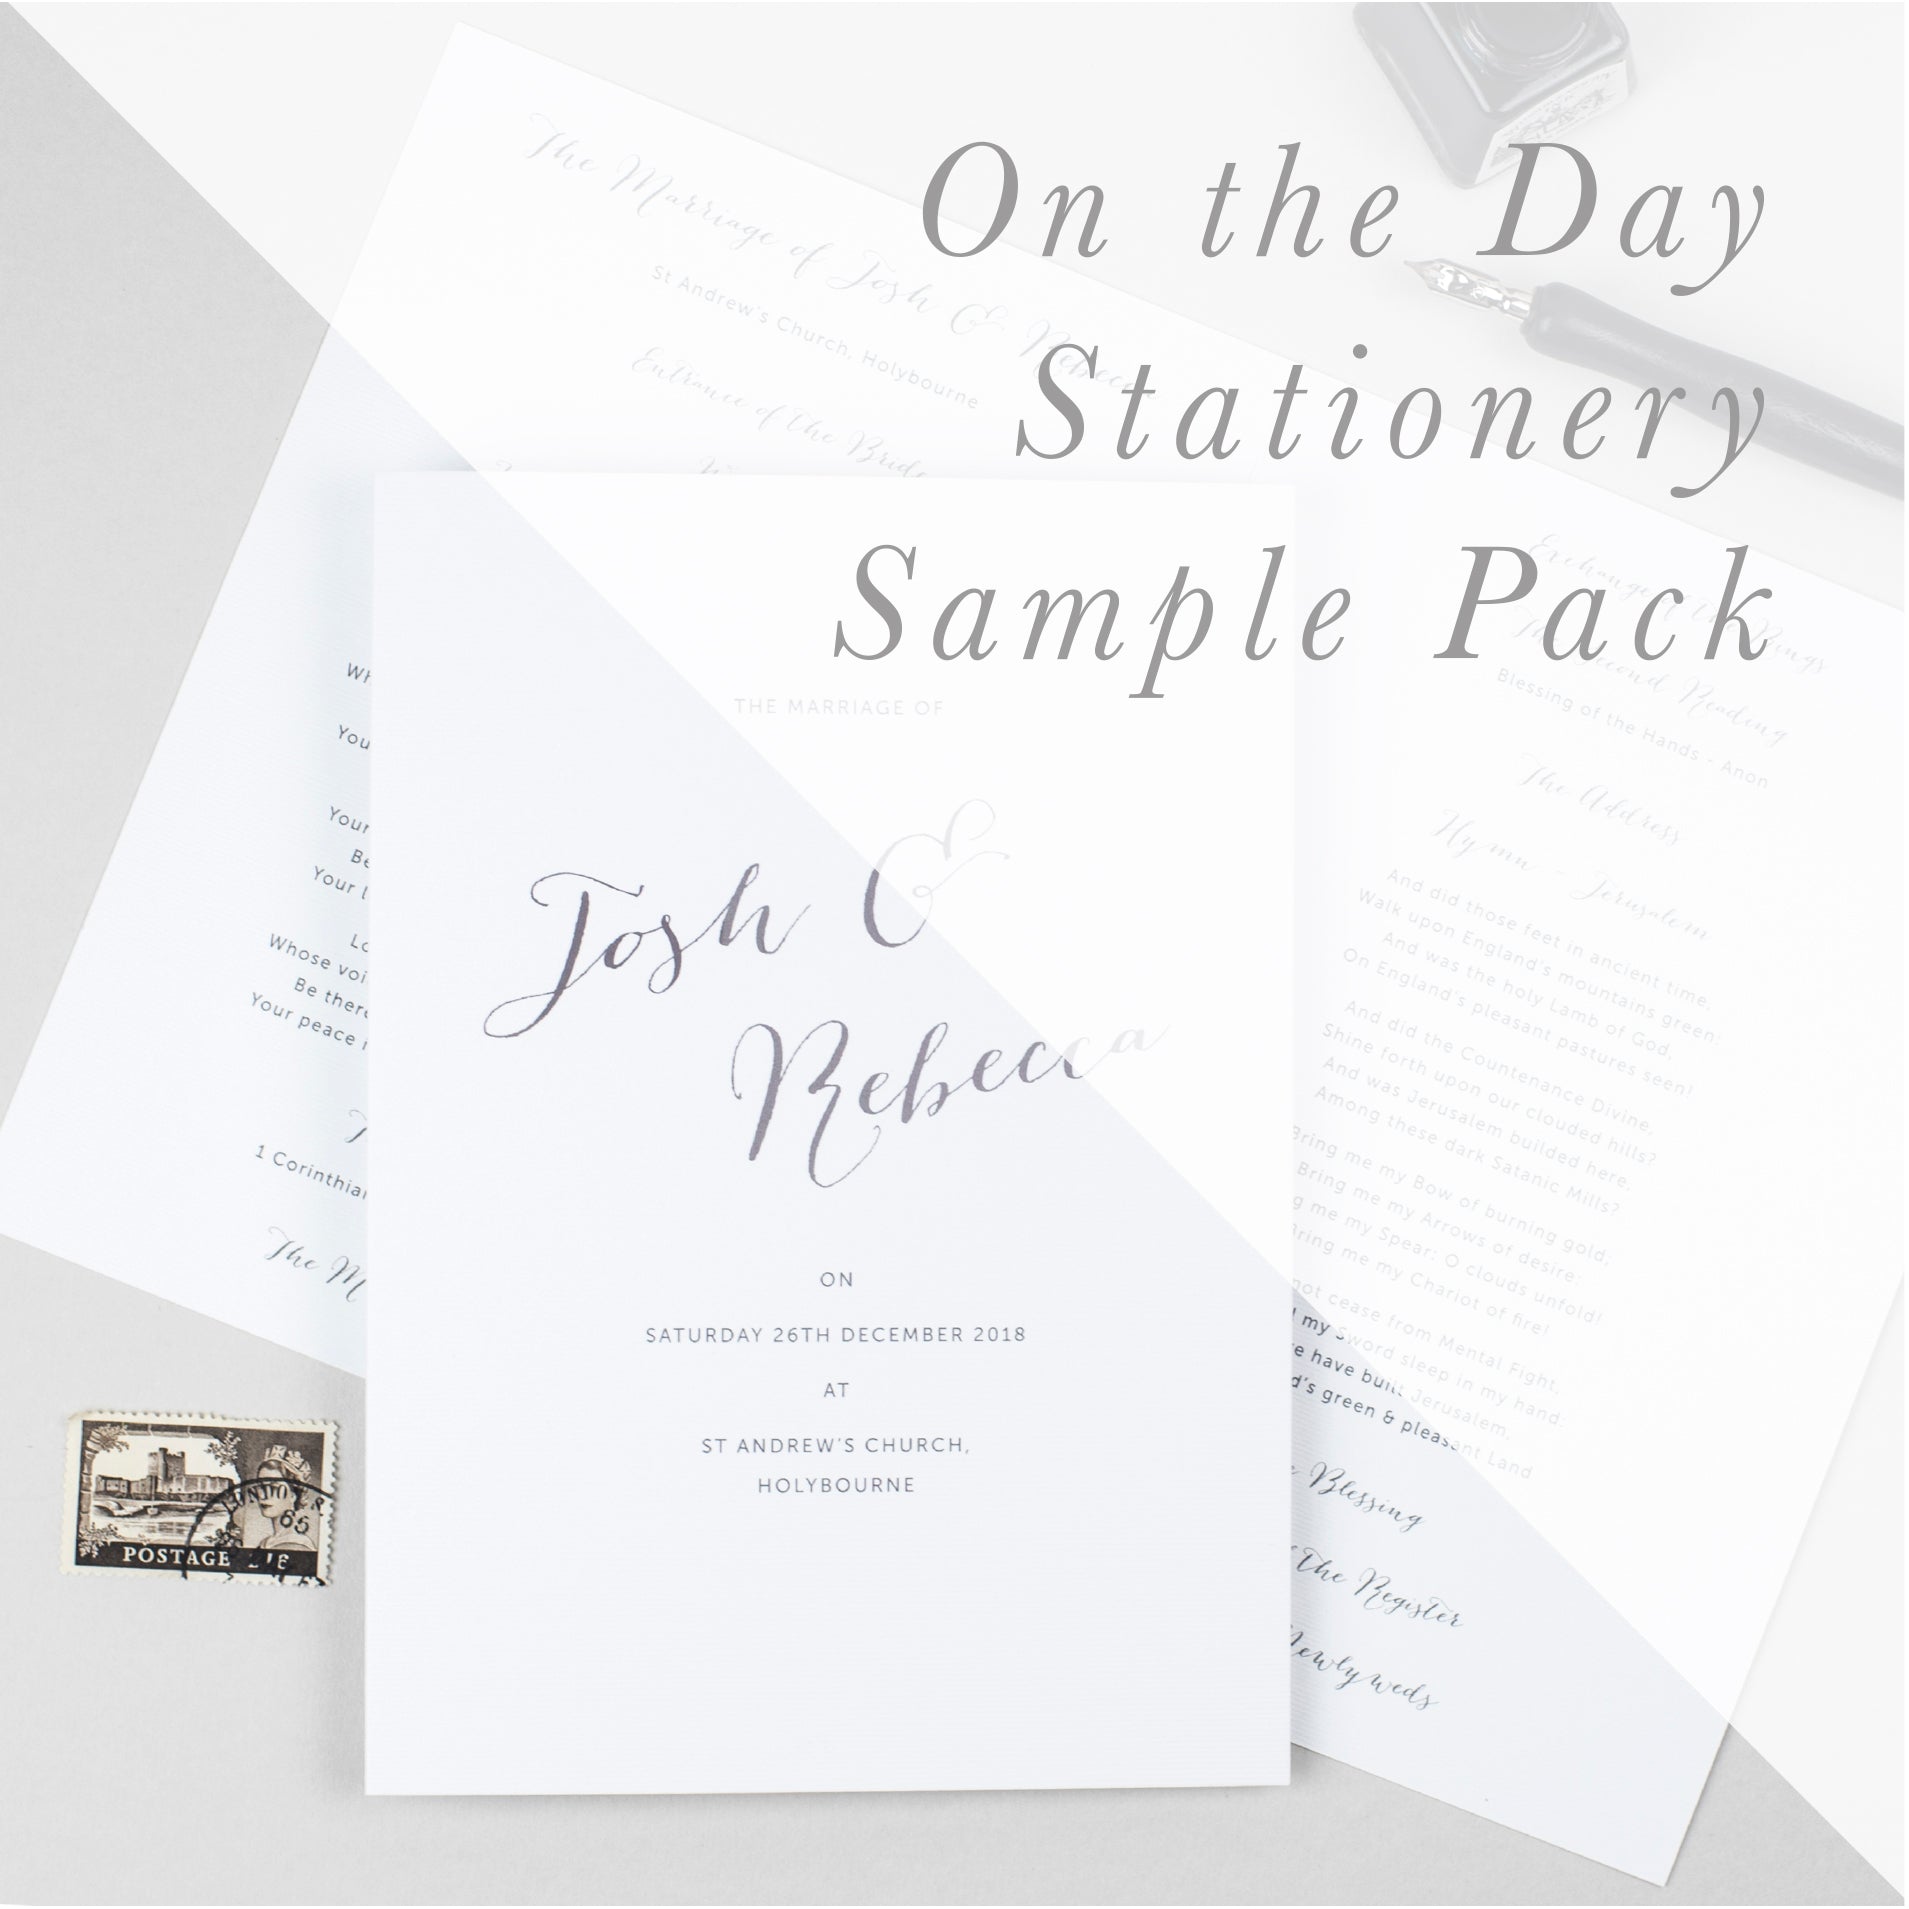 Sample Packs - On the Day Stationery - Pear Paper Co